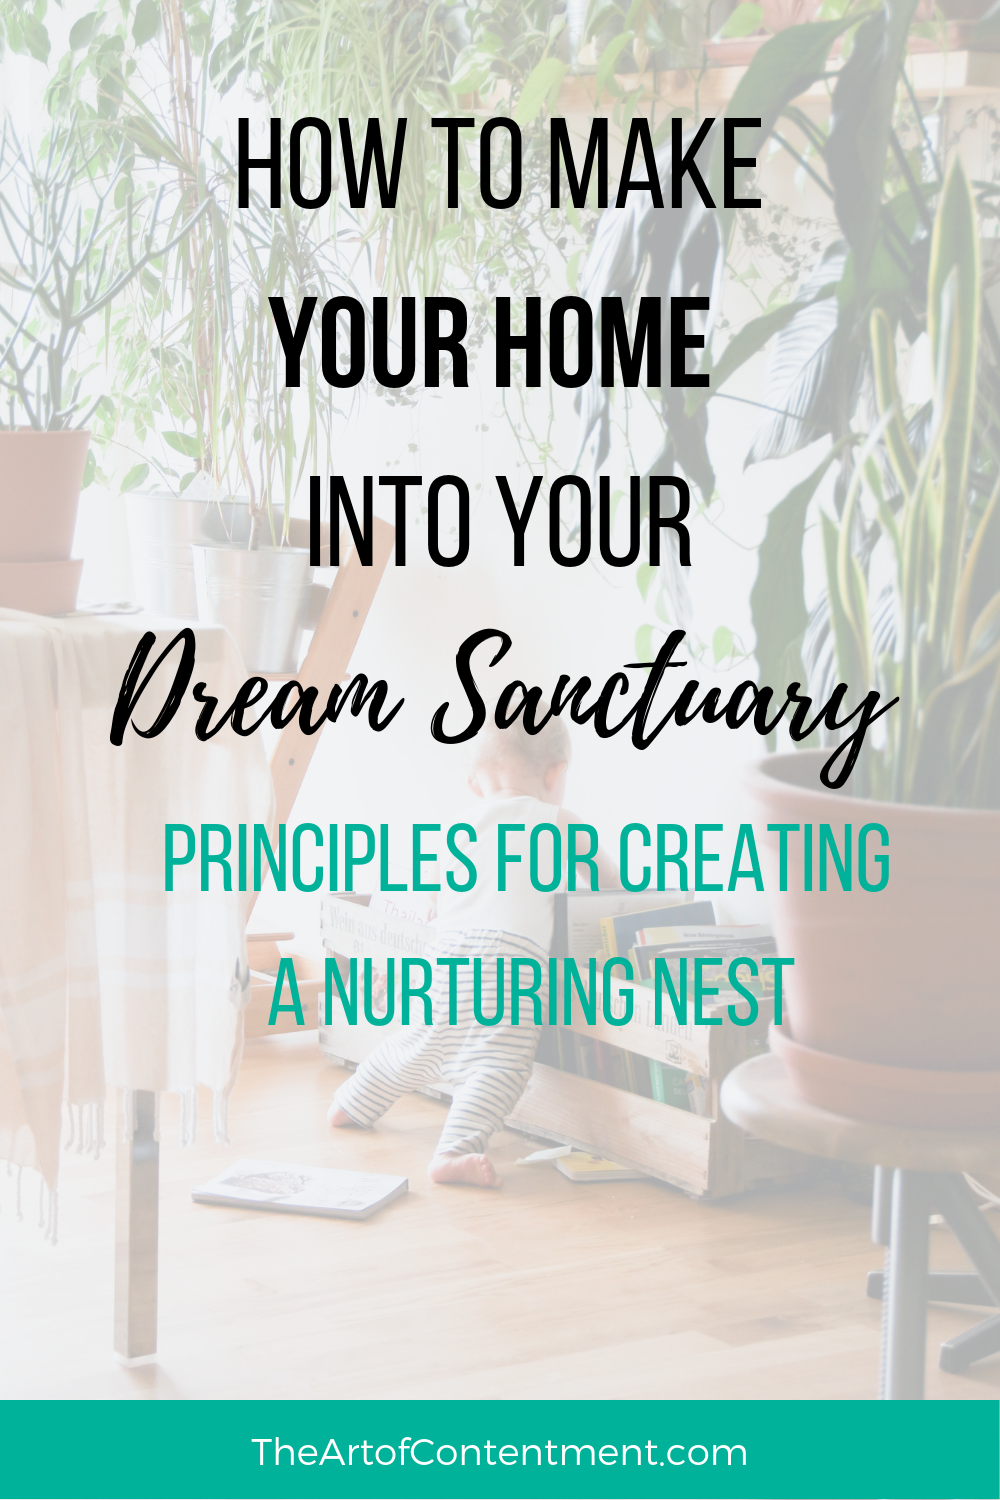 A sanctuary home doesn’t just happen – it’s created. Sanctuary is built with purpose. With a few guiding principles to light the way, we can establish our own place to belong.